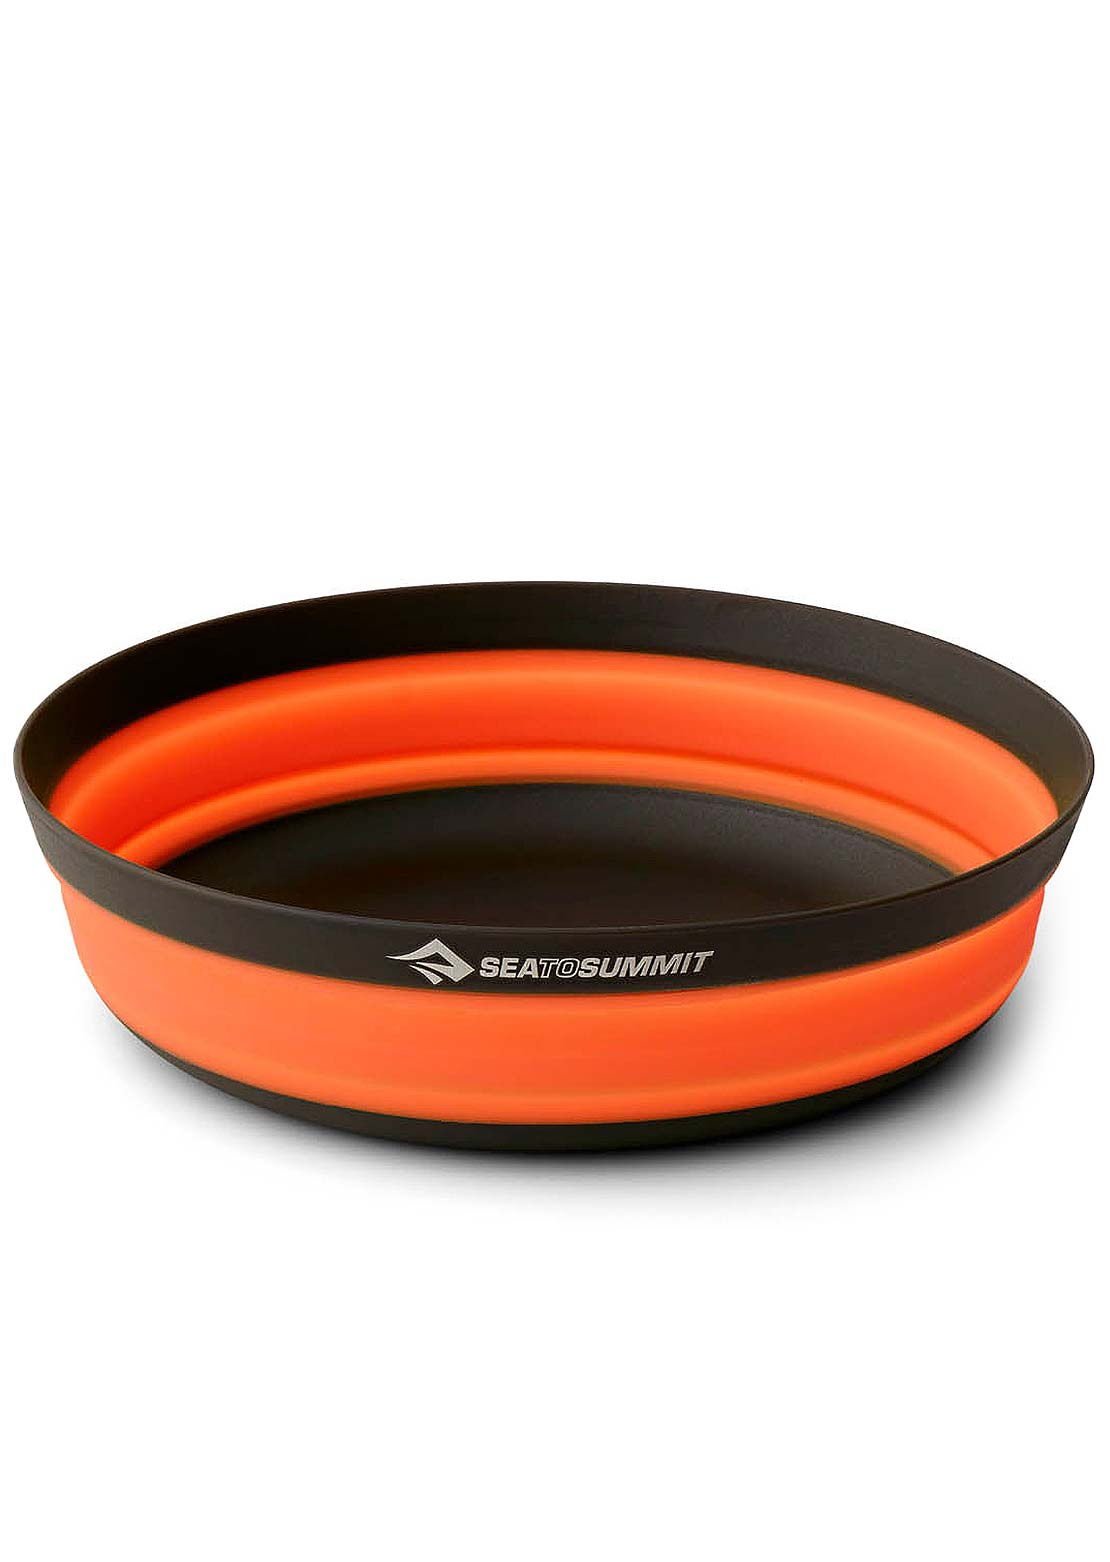 Sea To Summit Frontier UL Collapsible Bowl Puffinsbill Orange